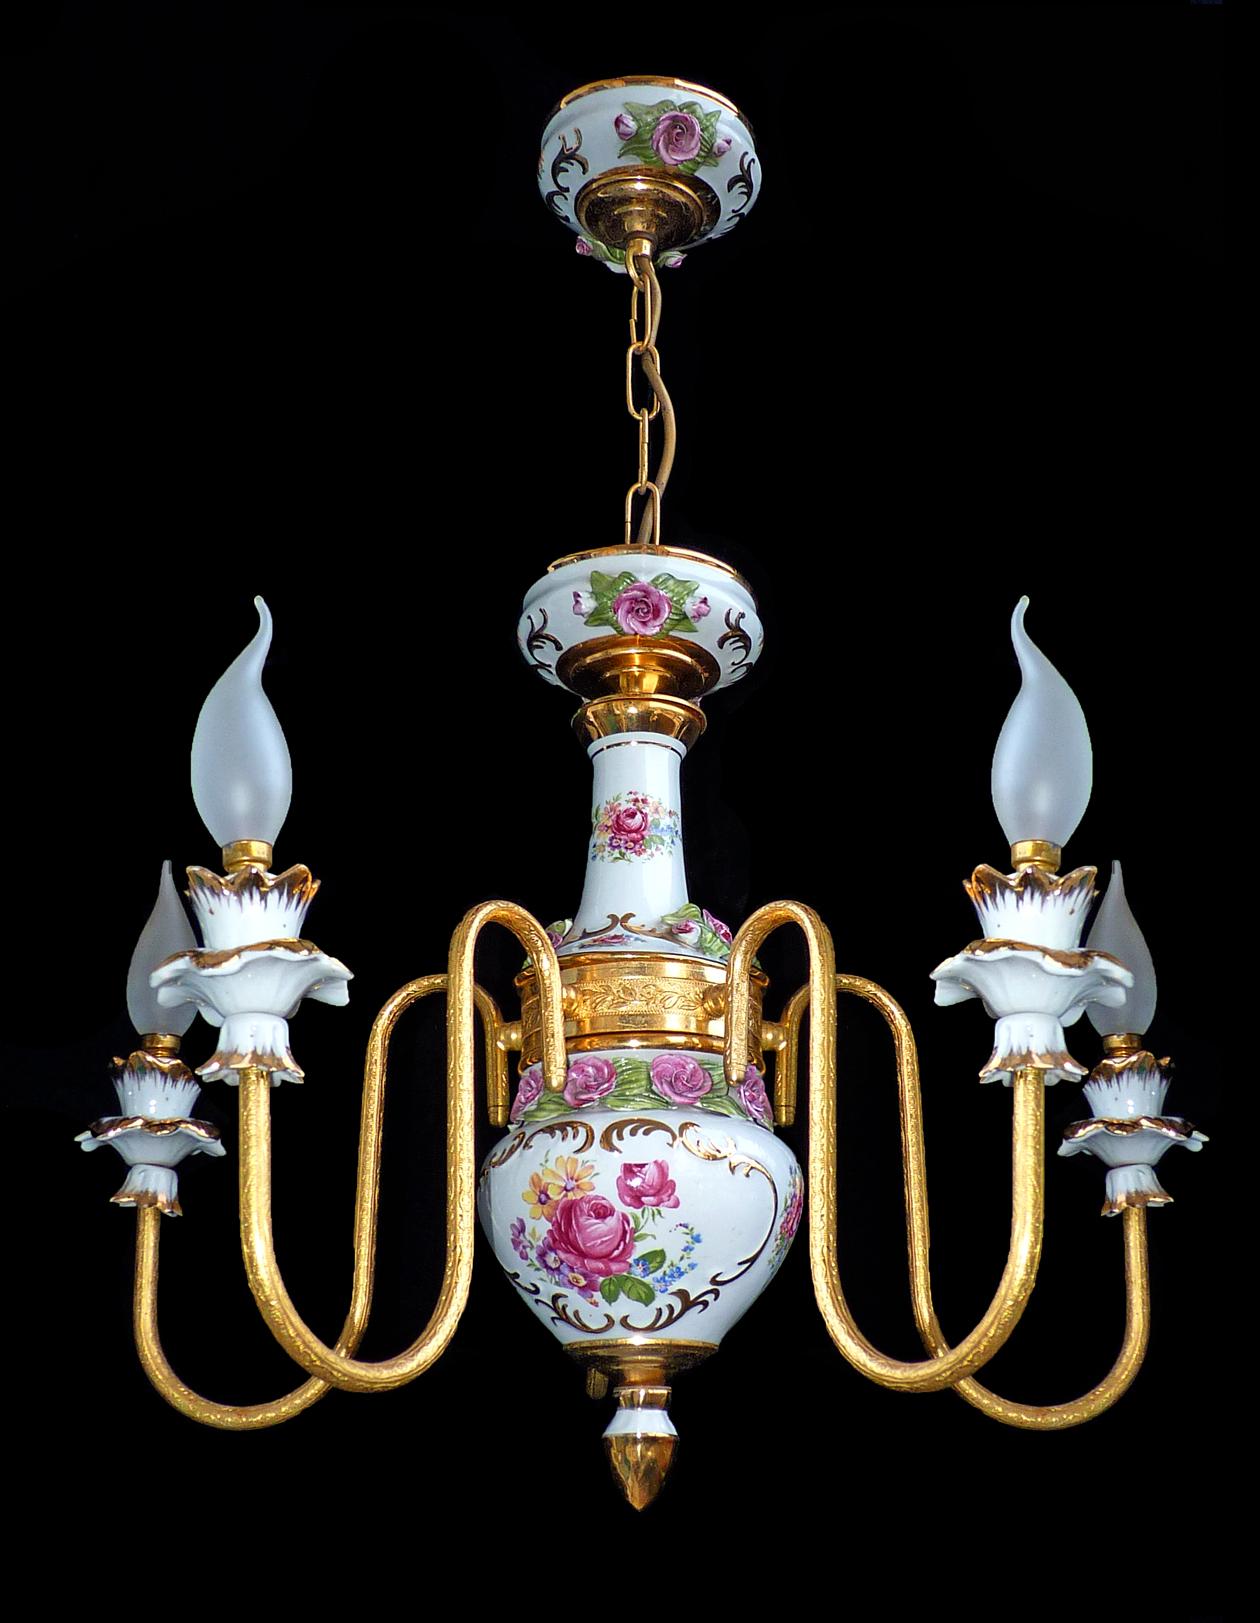 Gorgeous French Limoges style porcelain chandelier with five-light bulbs and sculpted applique porcelain roses, leaves and gilt brass
Measures:
Diameter 23.6 in/ 60 cm
Height 29.5 in/ 75 cm, Chain (20 cm)
Weight: 10 lb/ 5 Kg
Five light bulbs E14/ 60